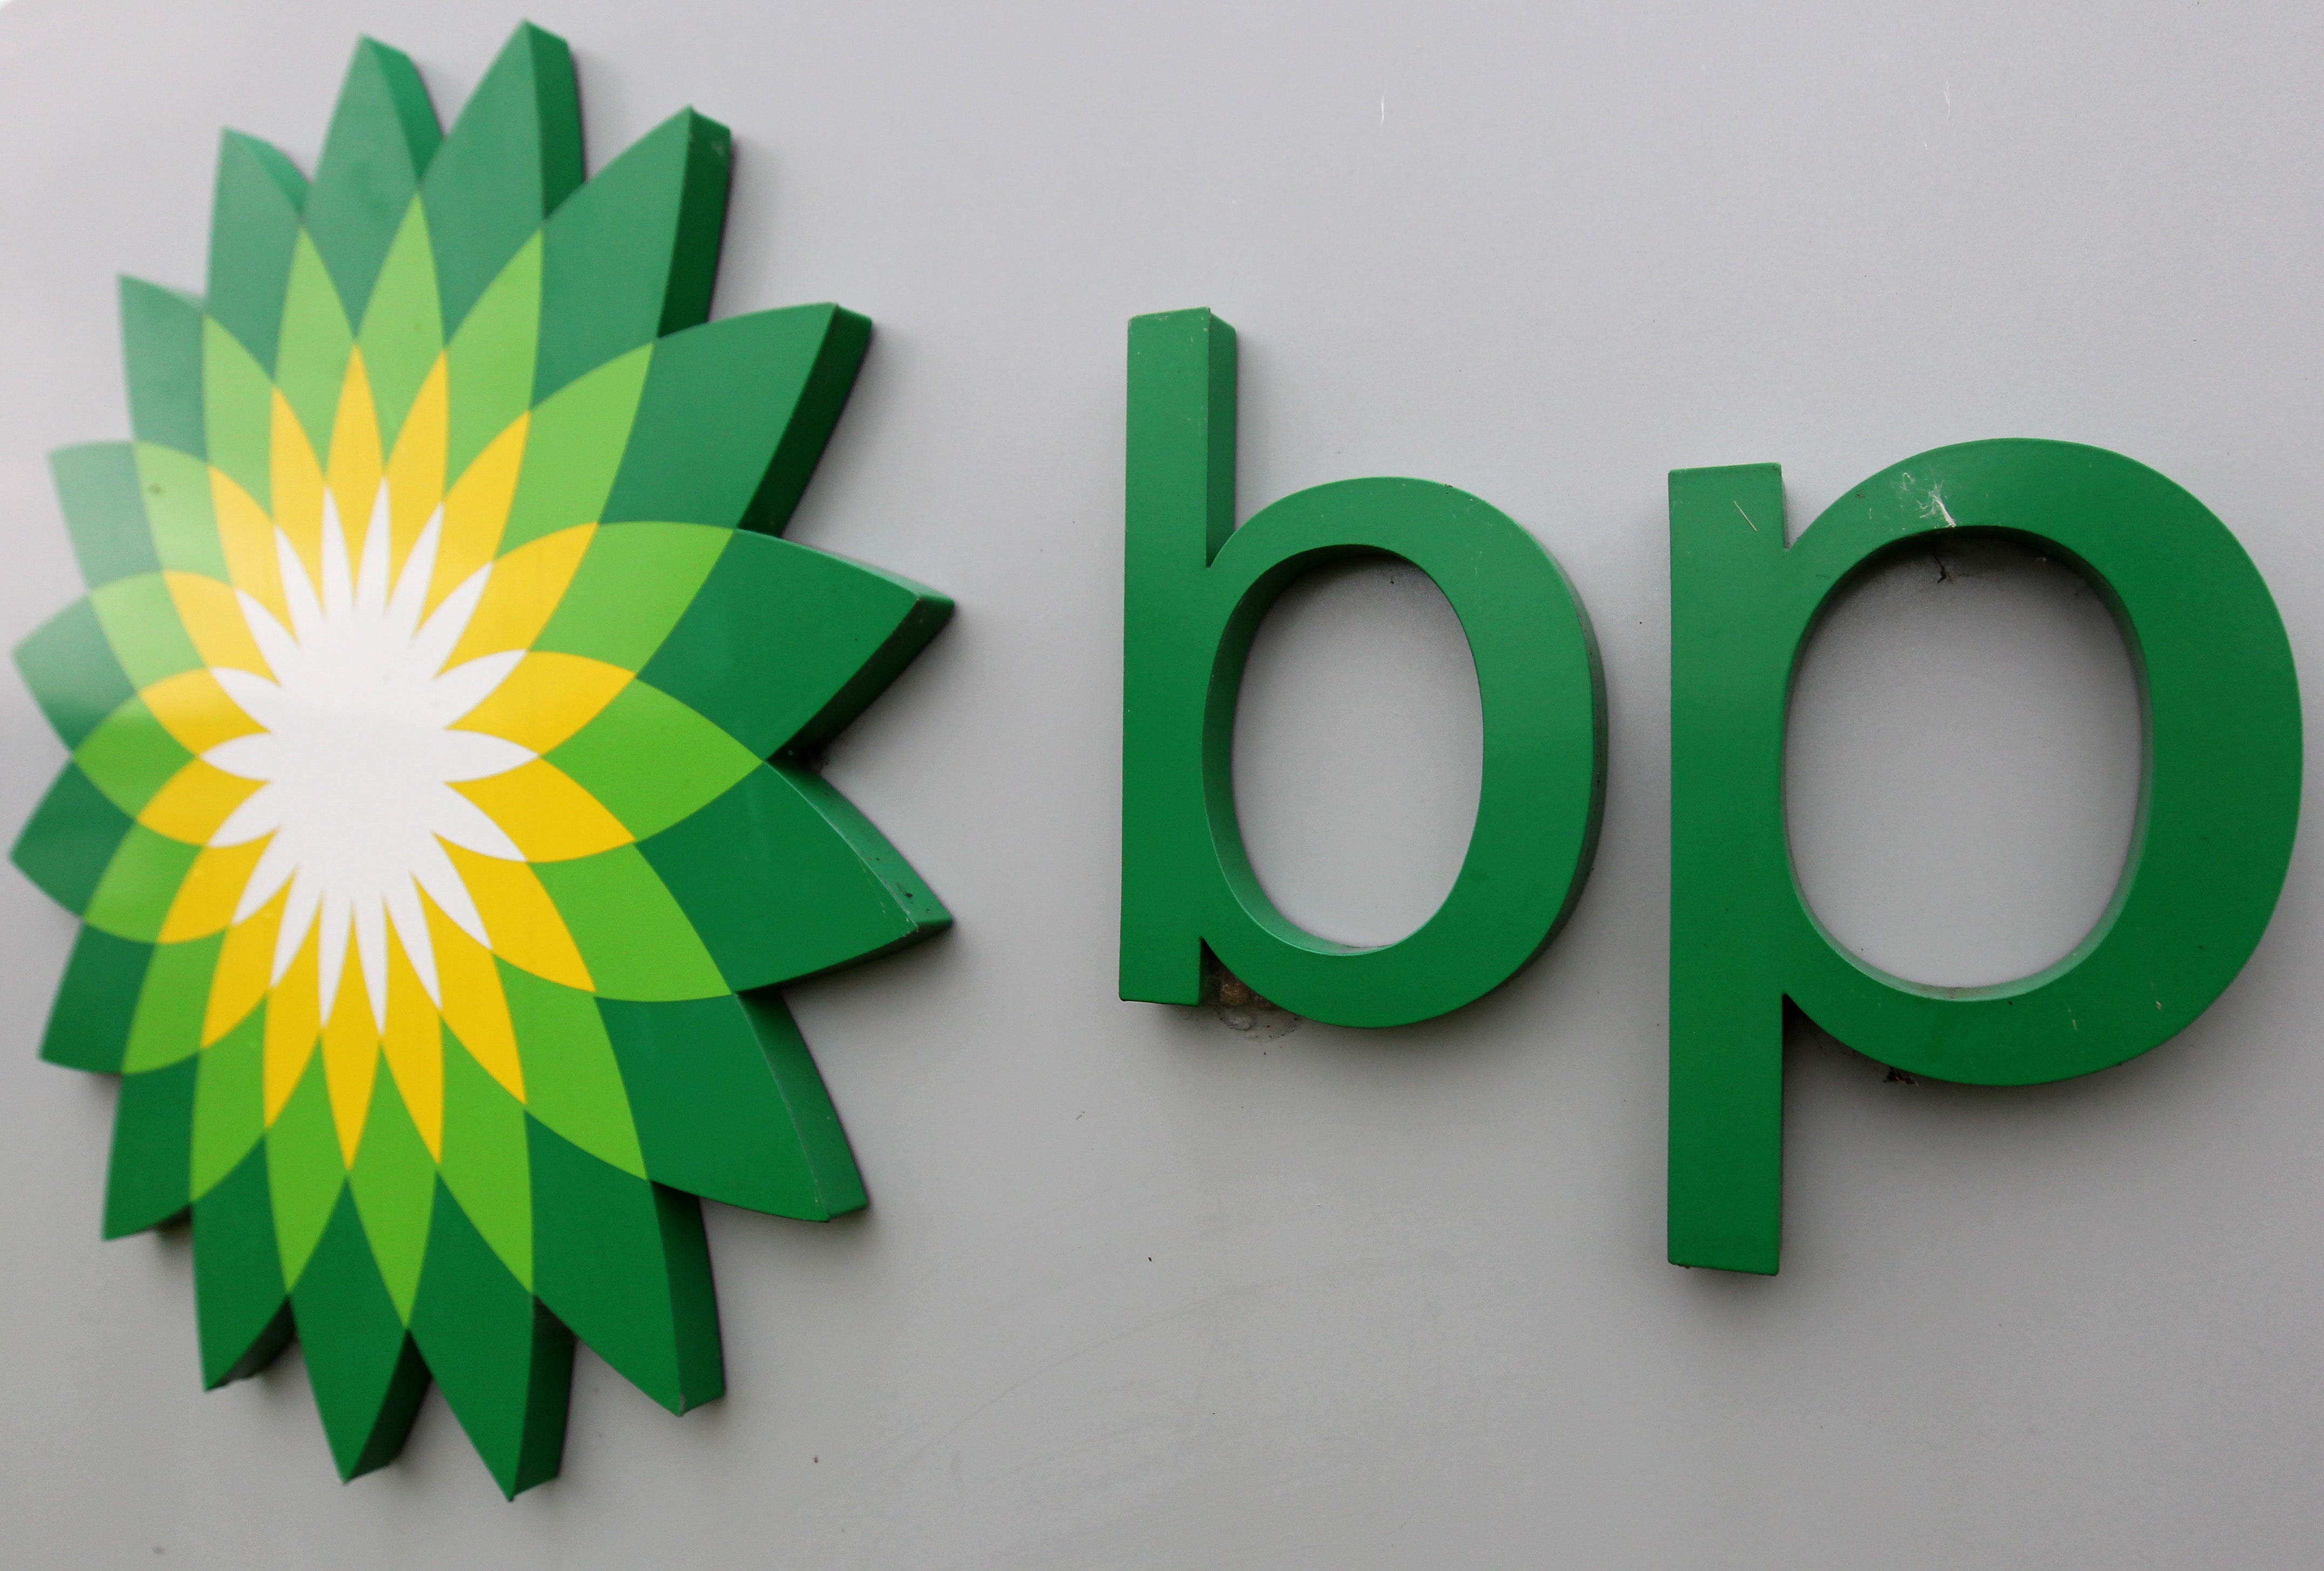 BP has revealed second-quarter profits more than trebled to a 14-year high